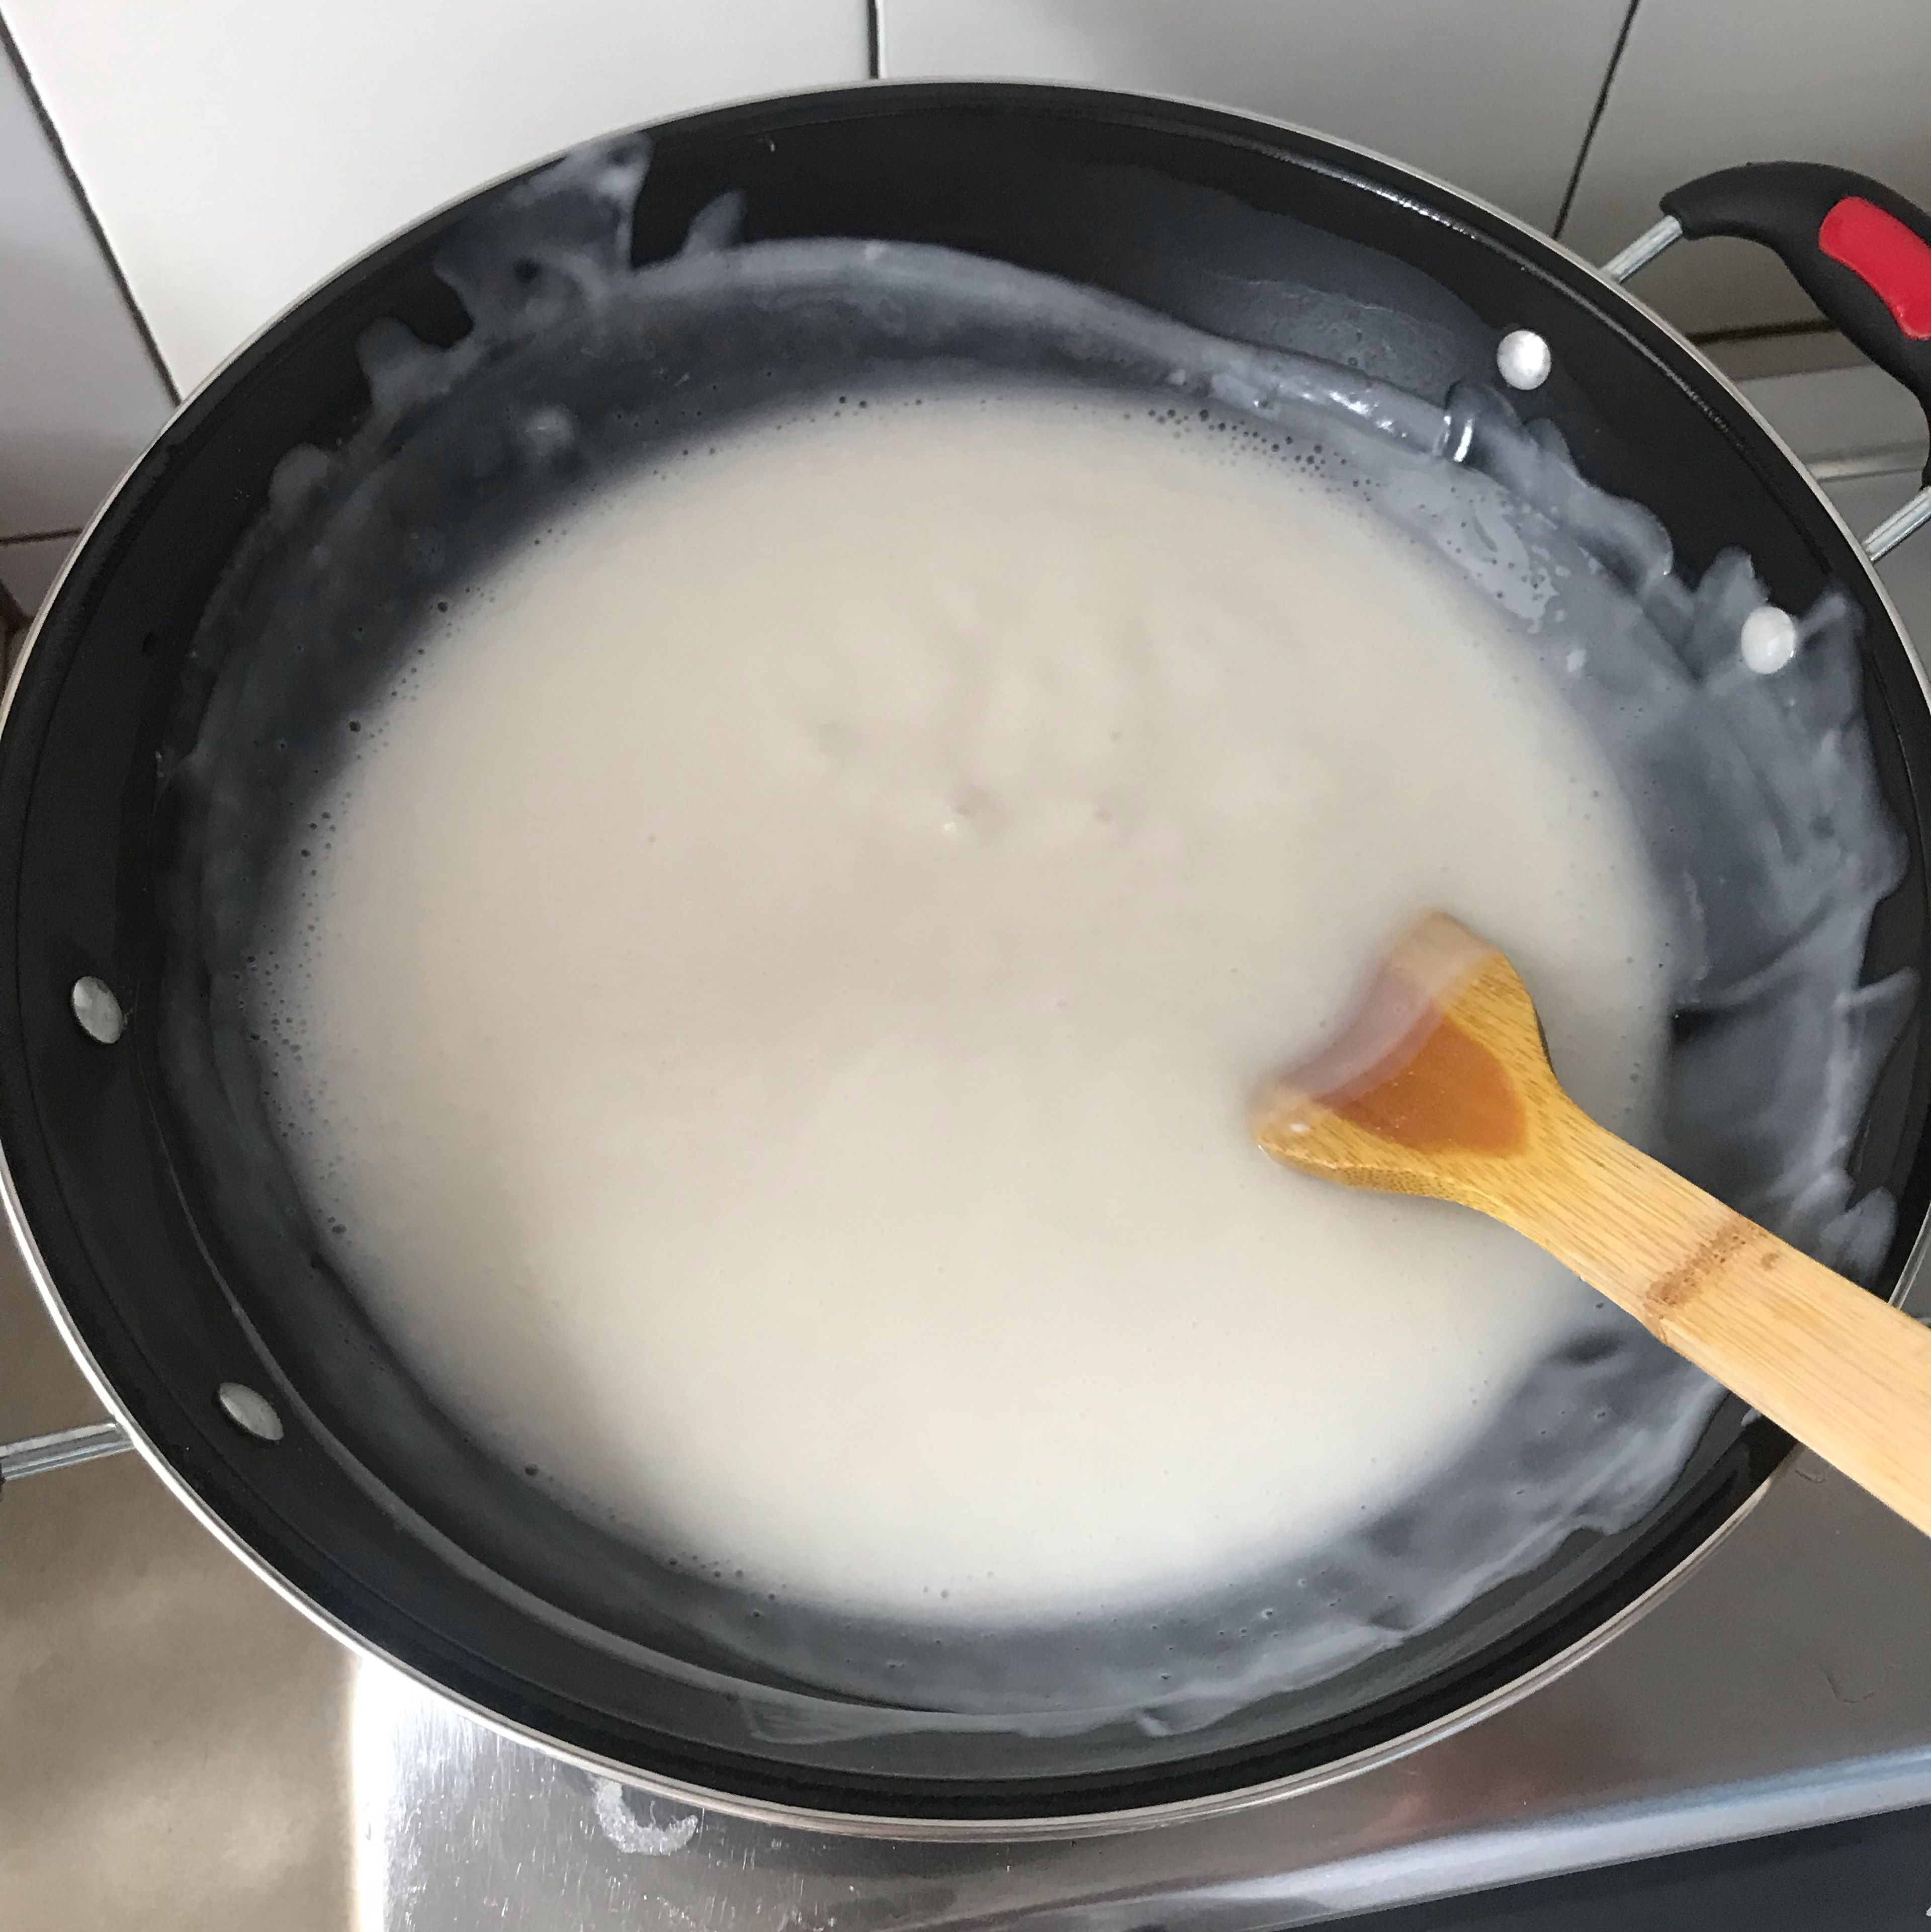 put water, coconut milk and sugar on the wok and heat it up while stirring it. make sure the mixture becomes soupy